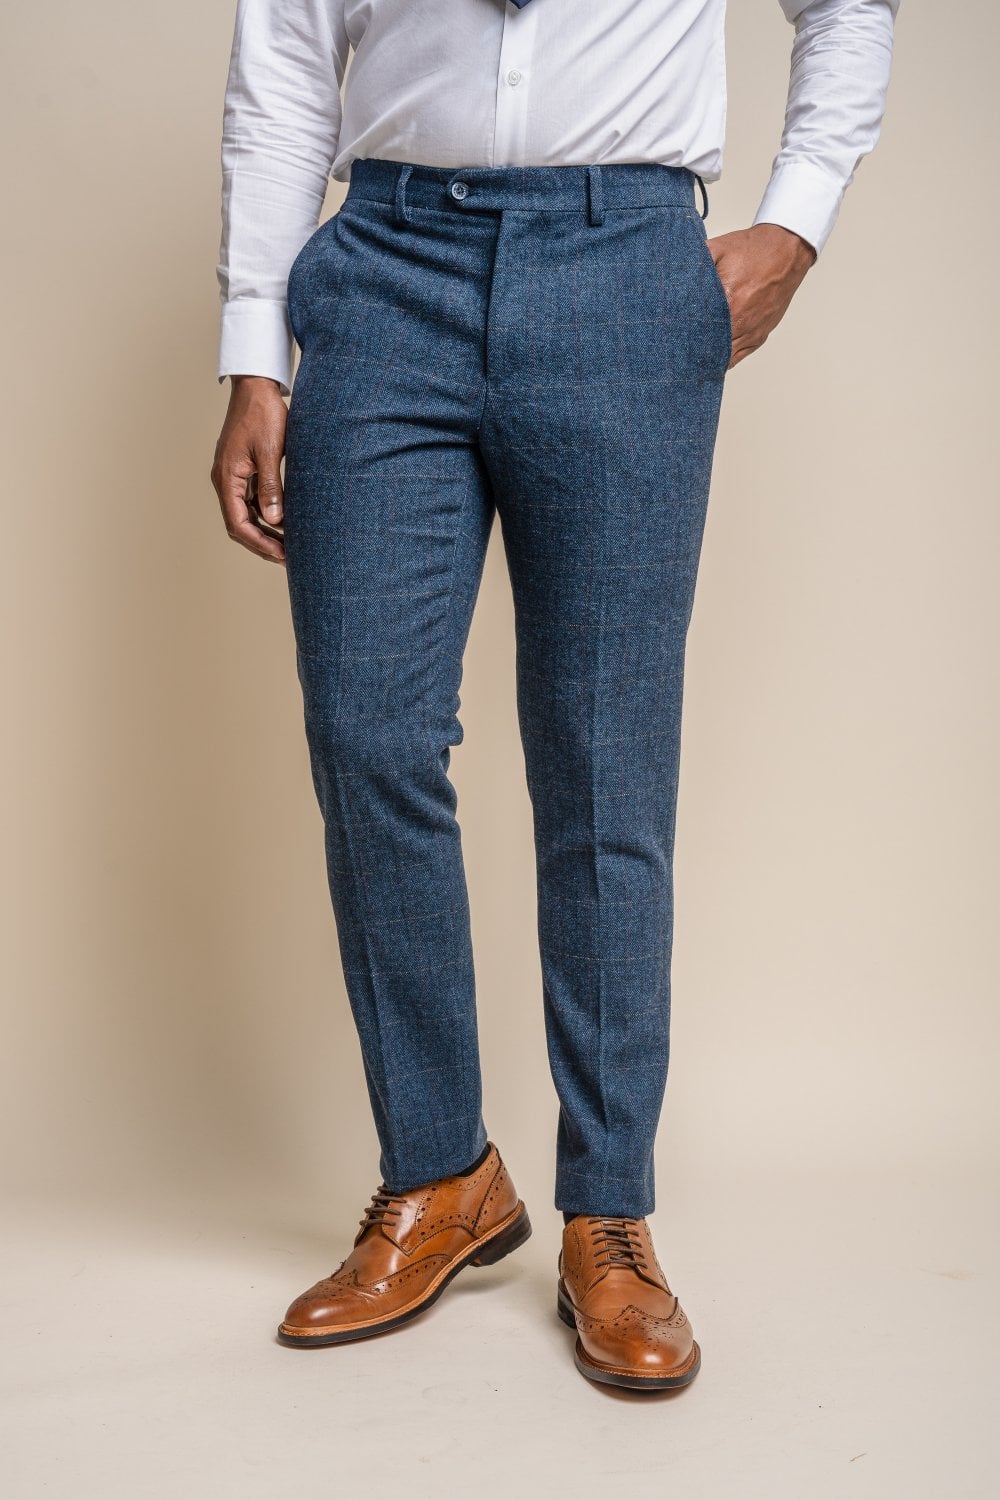 Carnegi Navy Tweed Trousers - Trousers - 28R - Swagger & Swoon